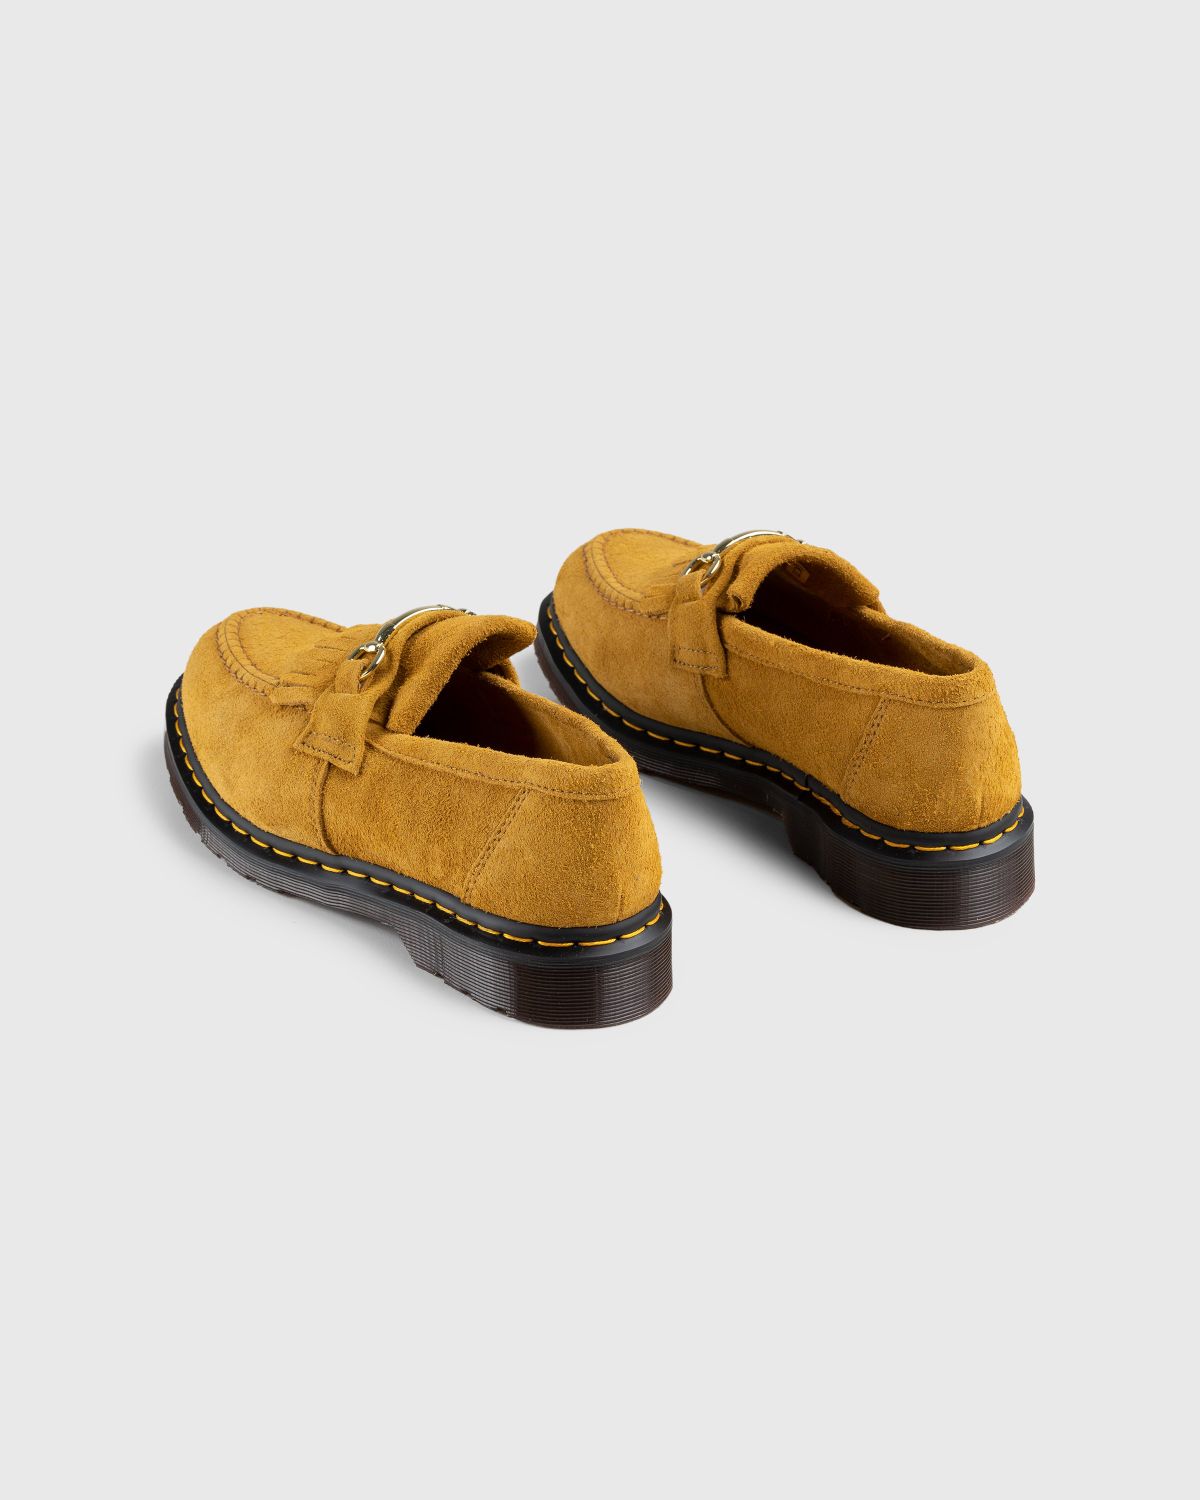 Dr. Martens – Adrian Snaffle Suede Loafers Light Tan Desert Oasis Suede (Gum Oil) - Shoes - Brown - Image 4